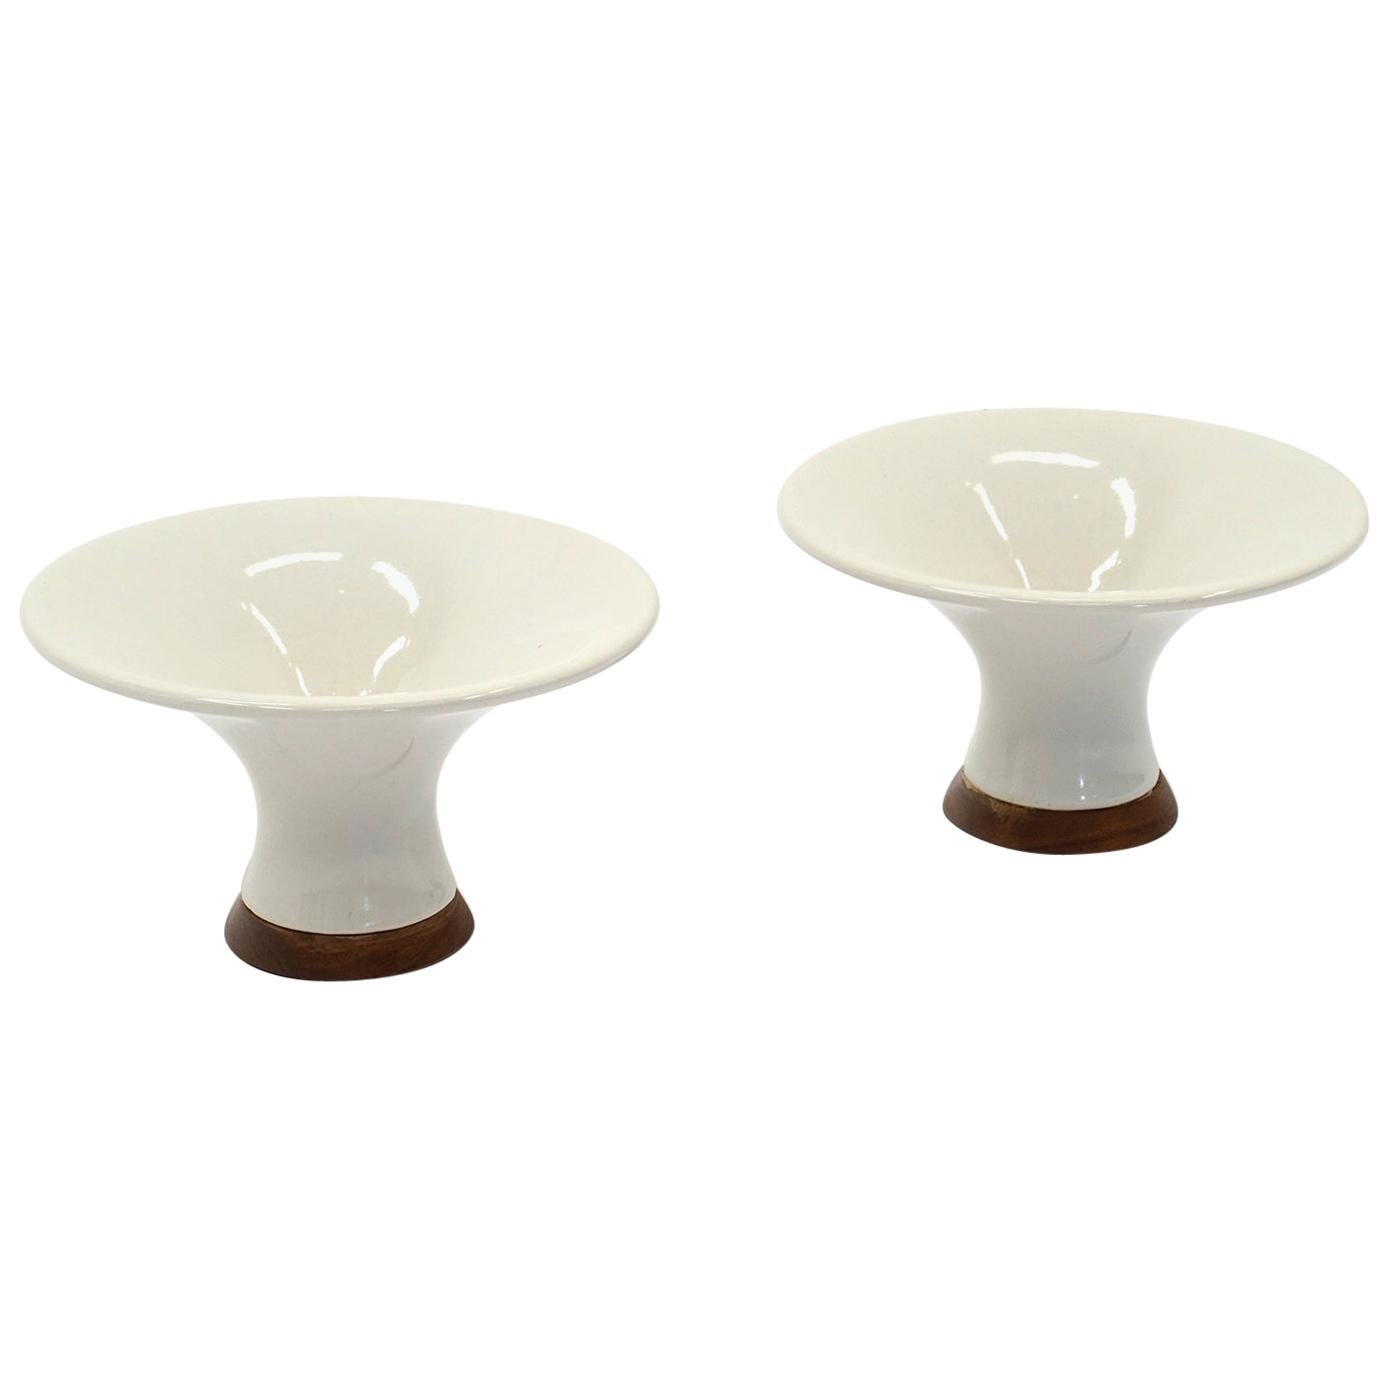 Pair of Danish Modern Candleholders, Off-White / Ivory Pottery and Teak Base